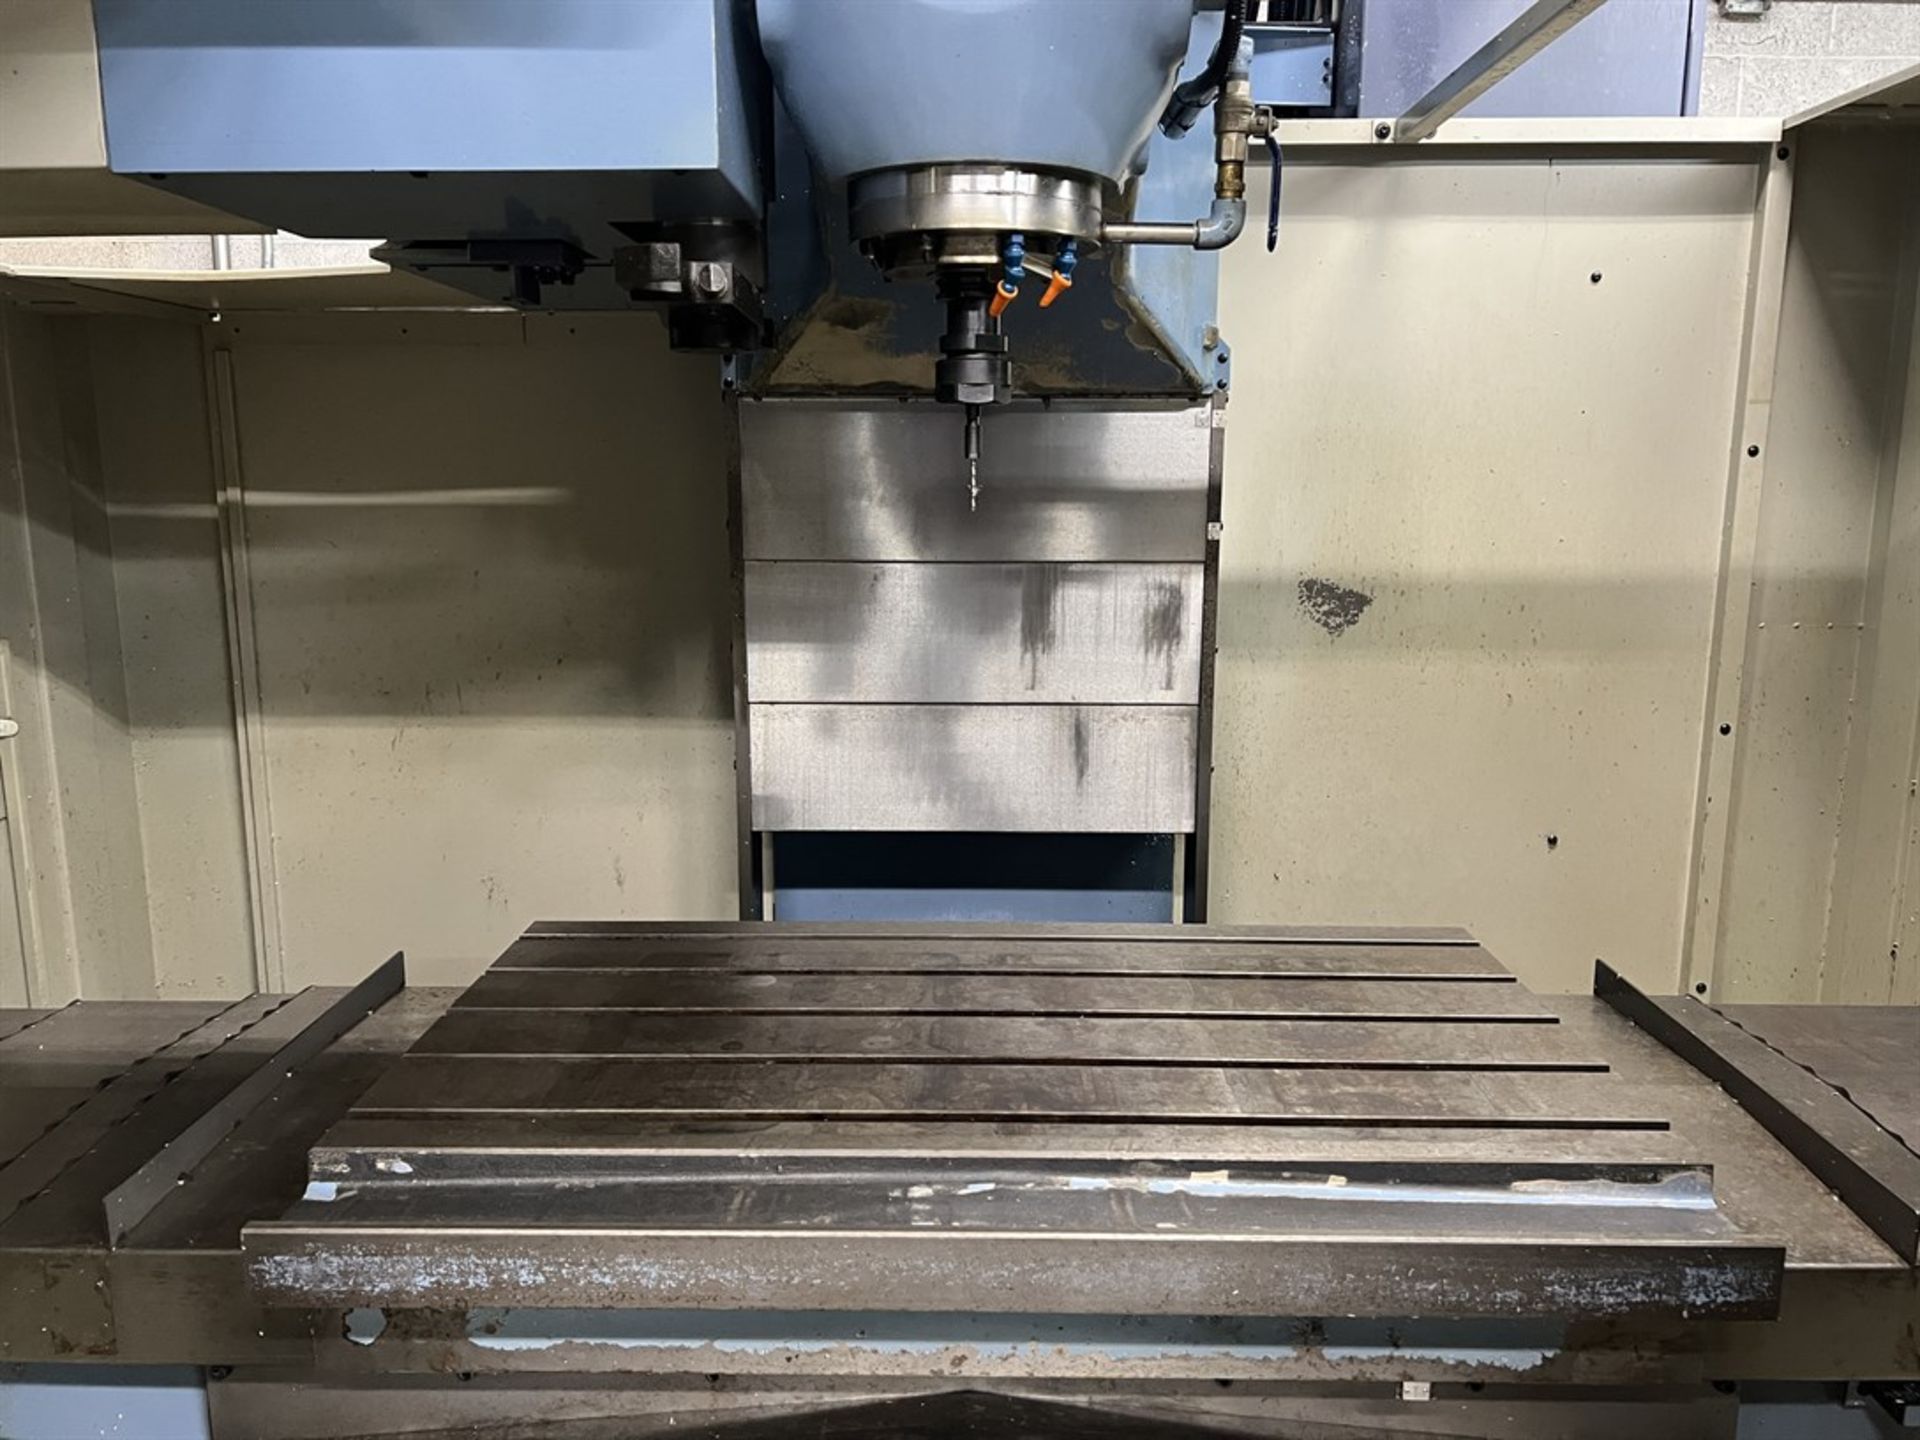 OKK VM5II Vertical Machining Center, s/n 452, Neomatic 635 Control, 22” x 41” Table, CT40 Spindle - Image 2 of 10